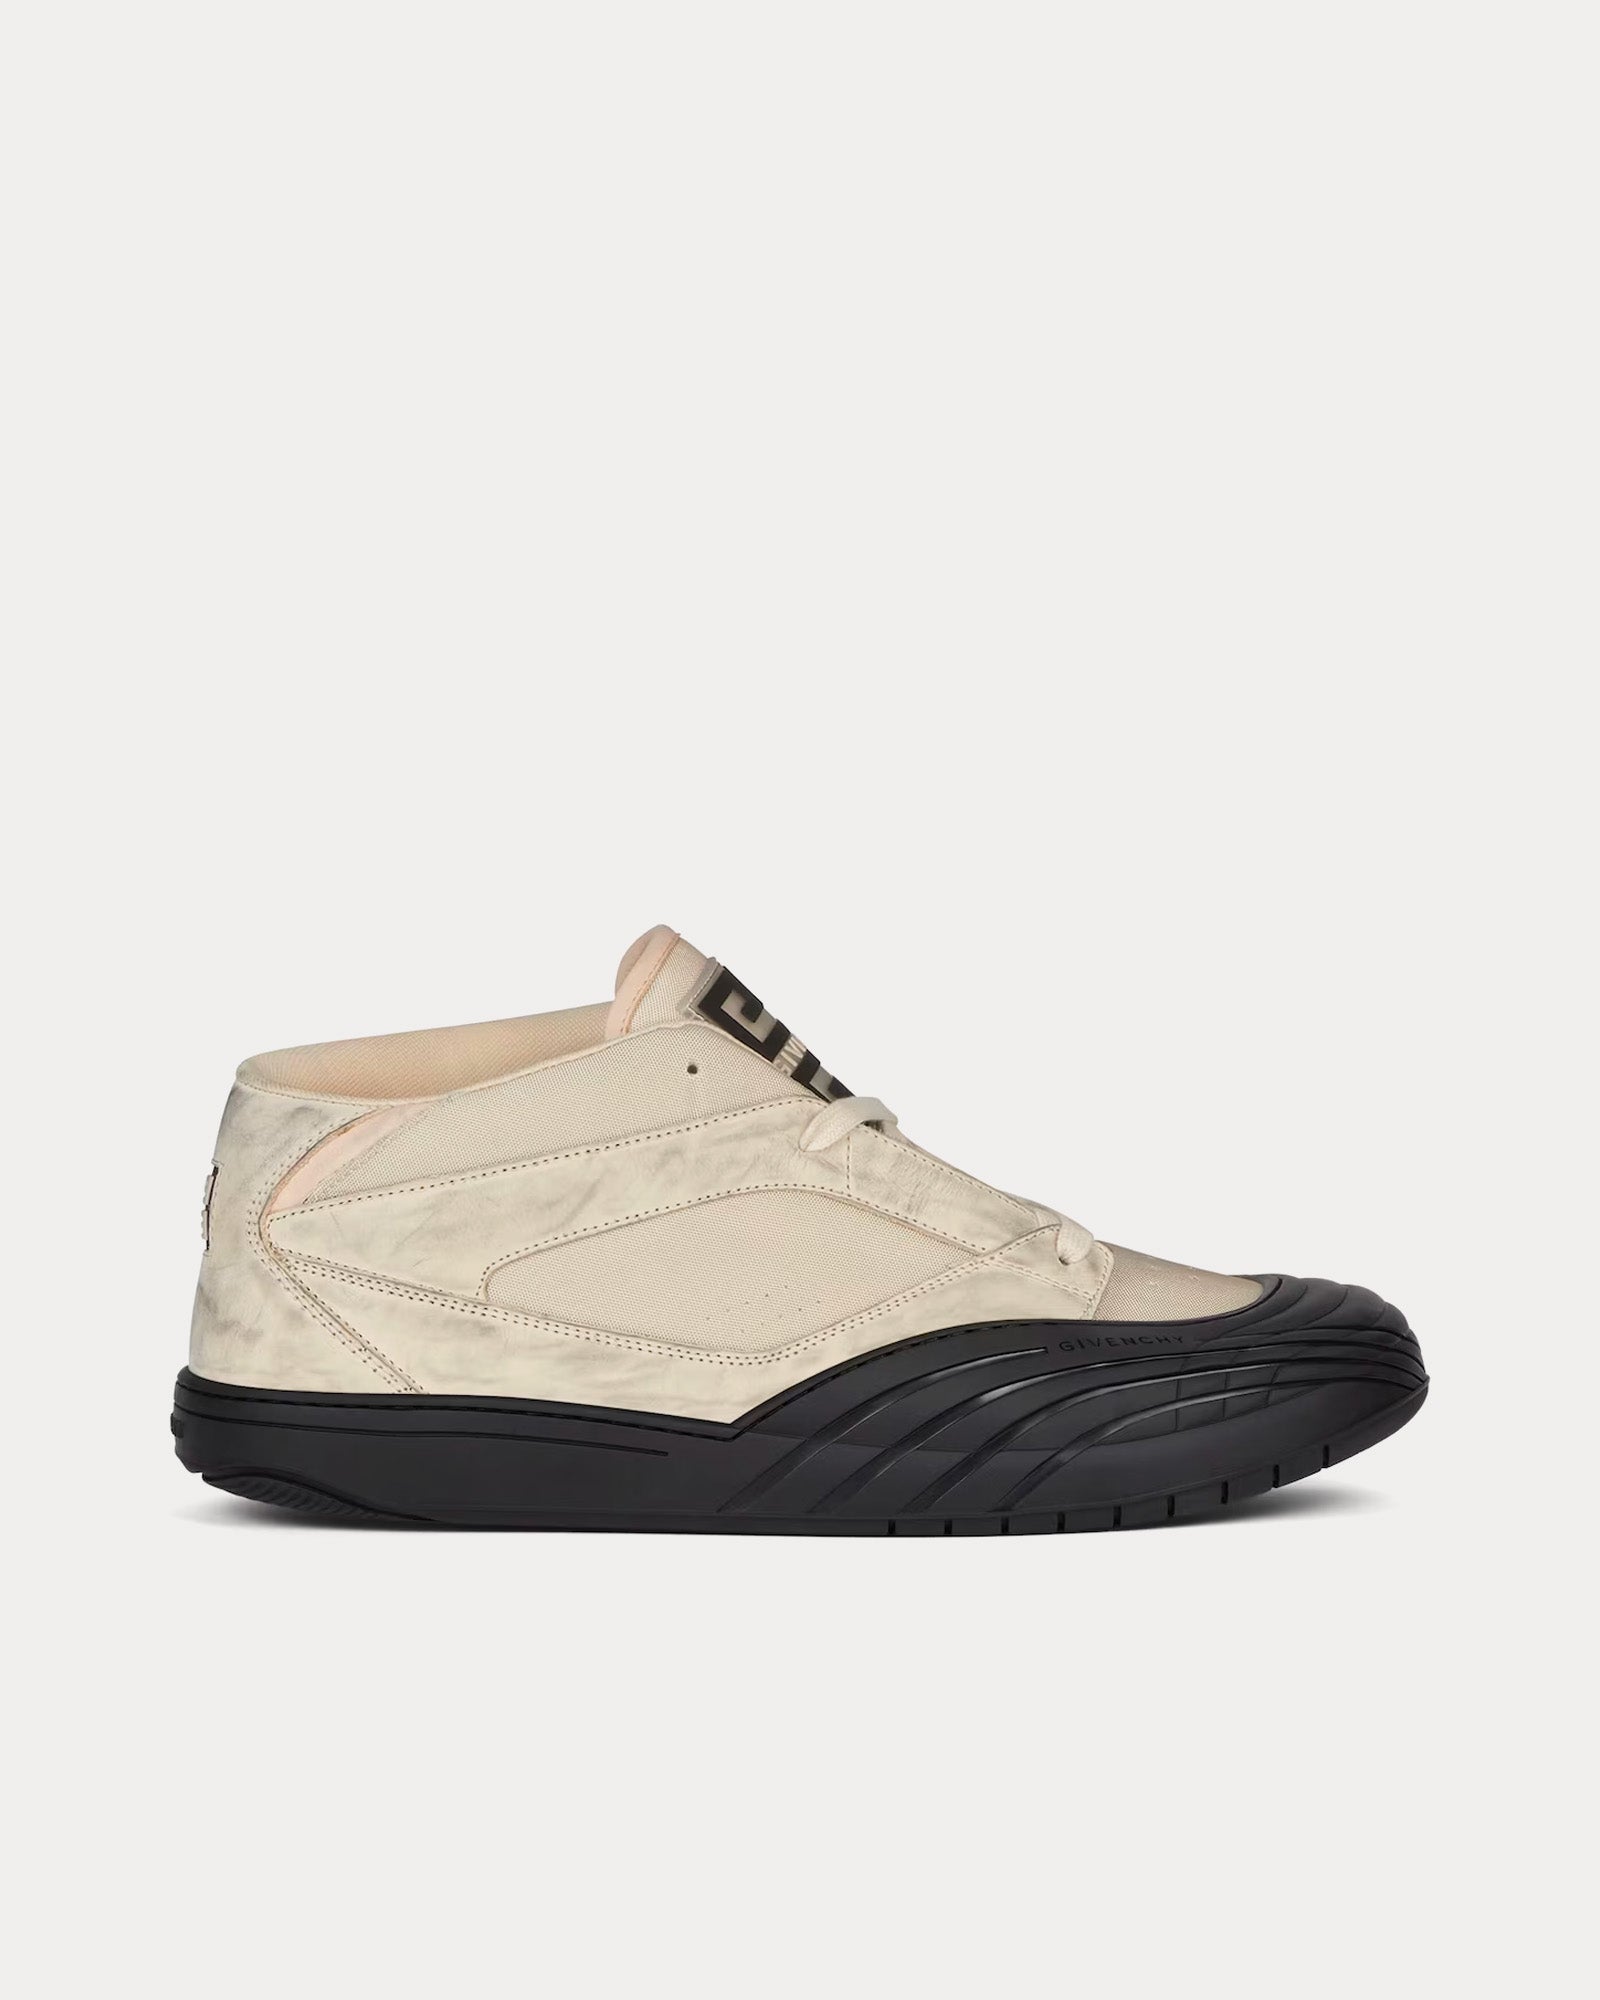 Givenchy - Skate Nubuck & Synthetic Fiber White Mid Top Sneakers